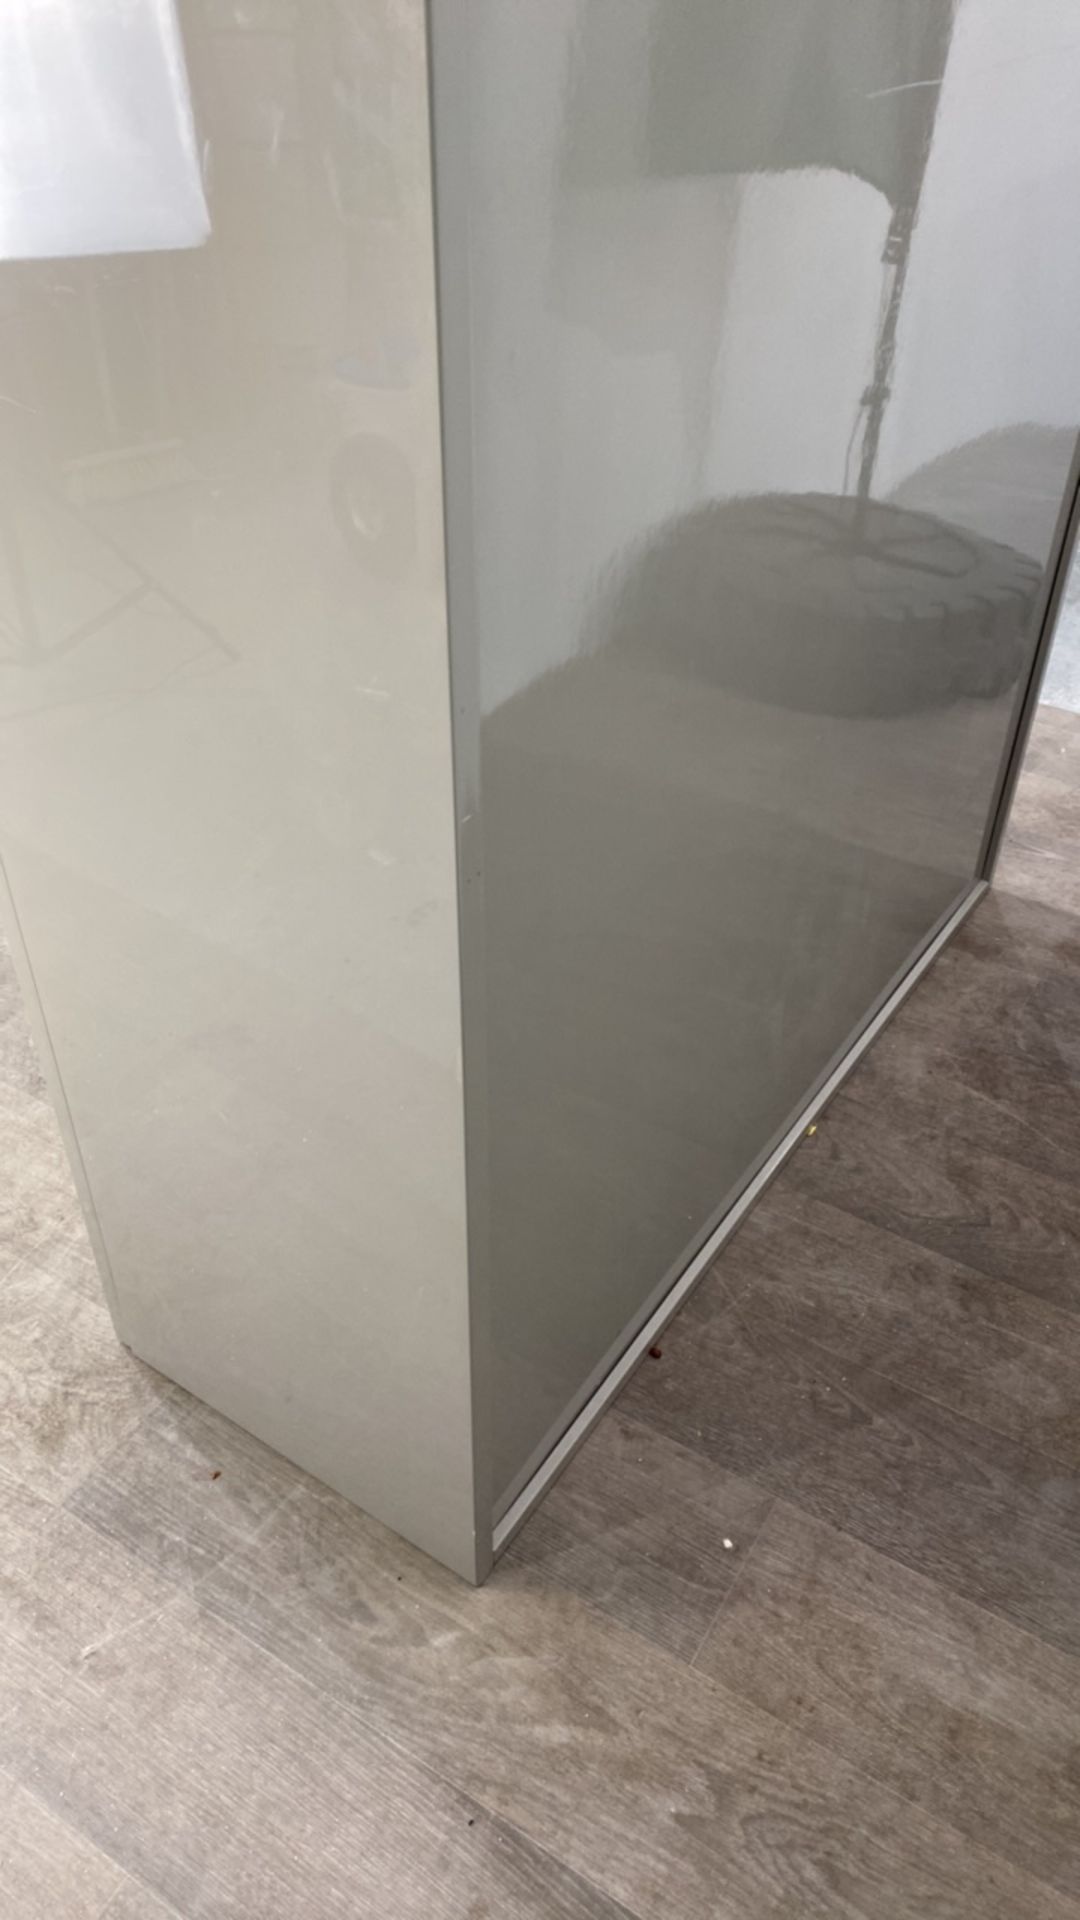 Double Door Cabinet - Gloss Grey Finish - Image 2 of 2